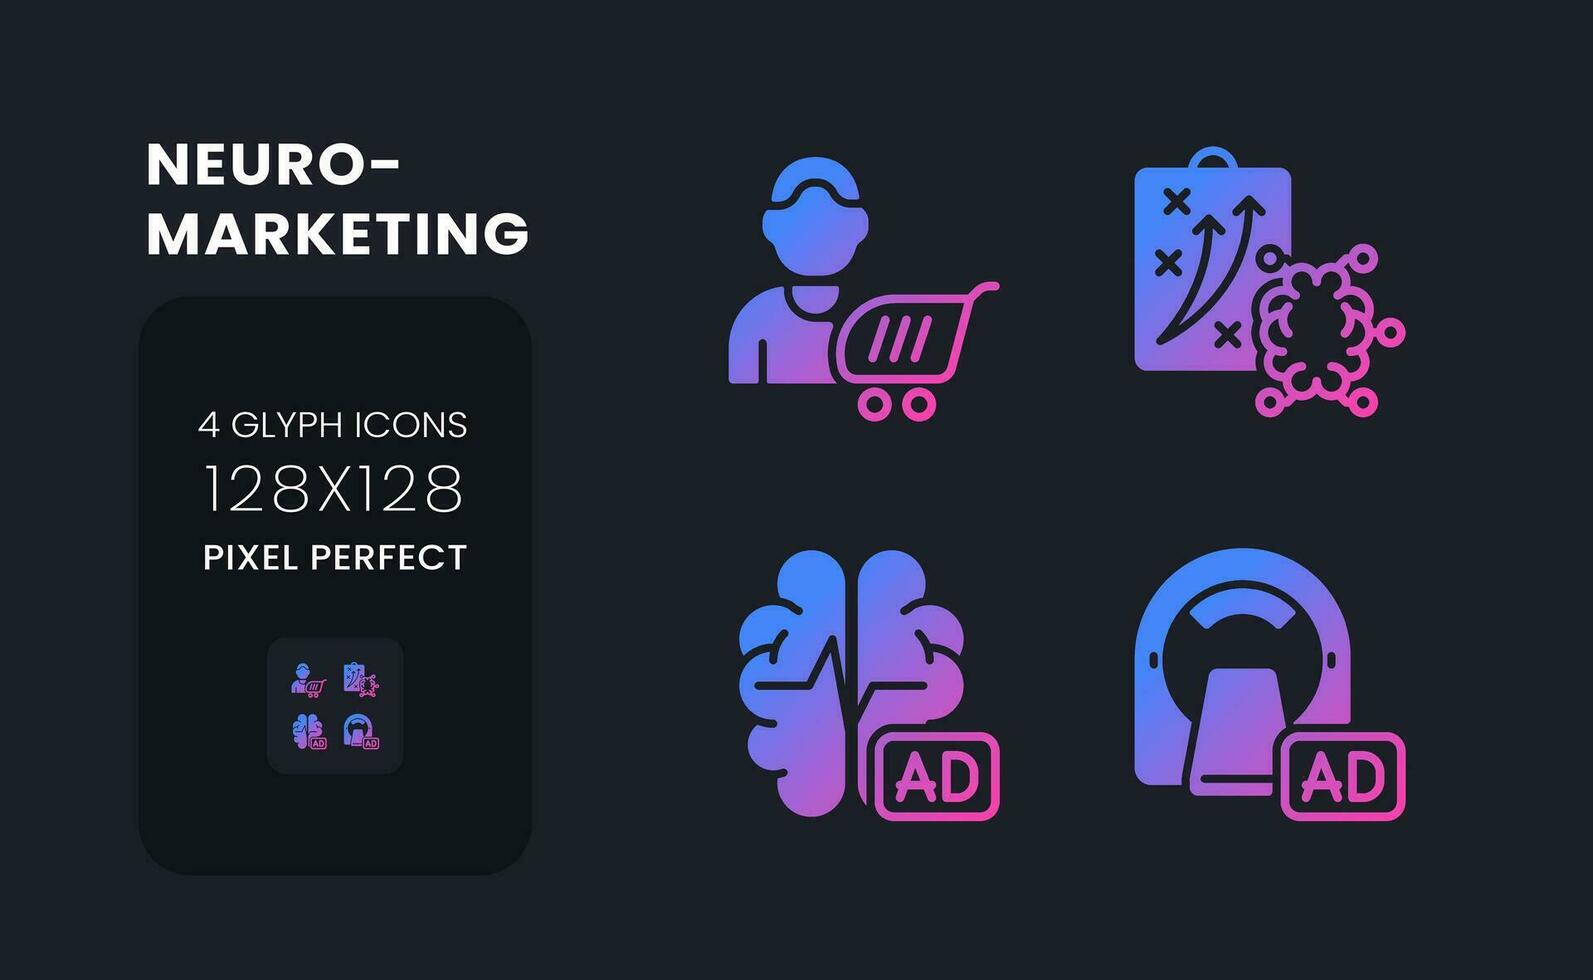 Neuro marketing purple solid gradient desktop icons. Neuromarketing research. Cognitive science. Pixel perfect 128x128, outline 4px. Glyph pictograms kit for dark theme. Isolated vector images